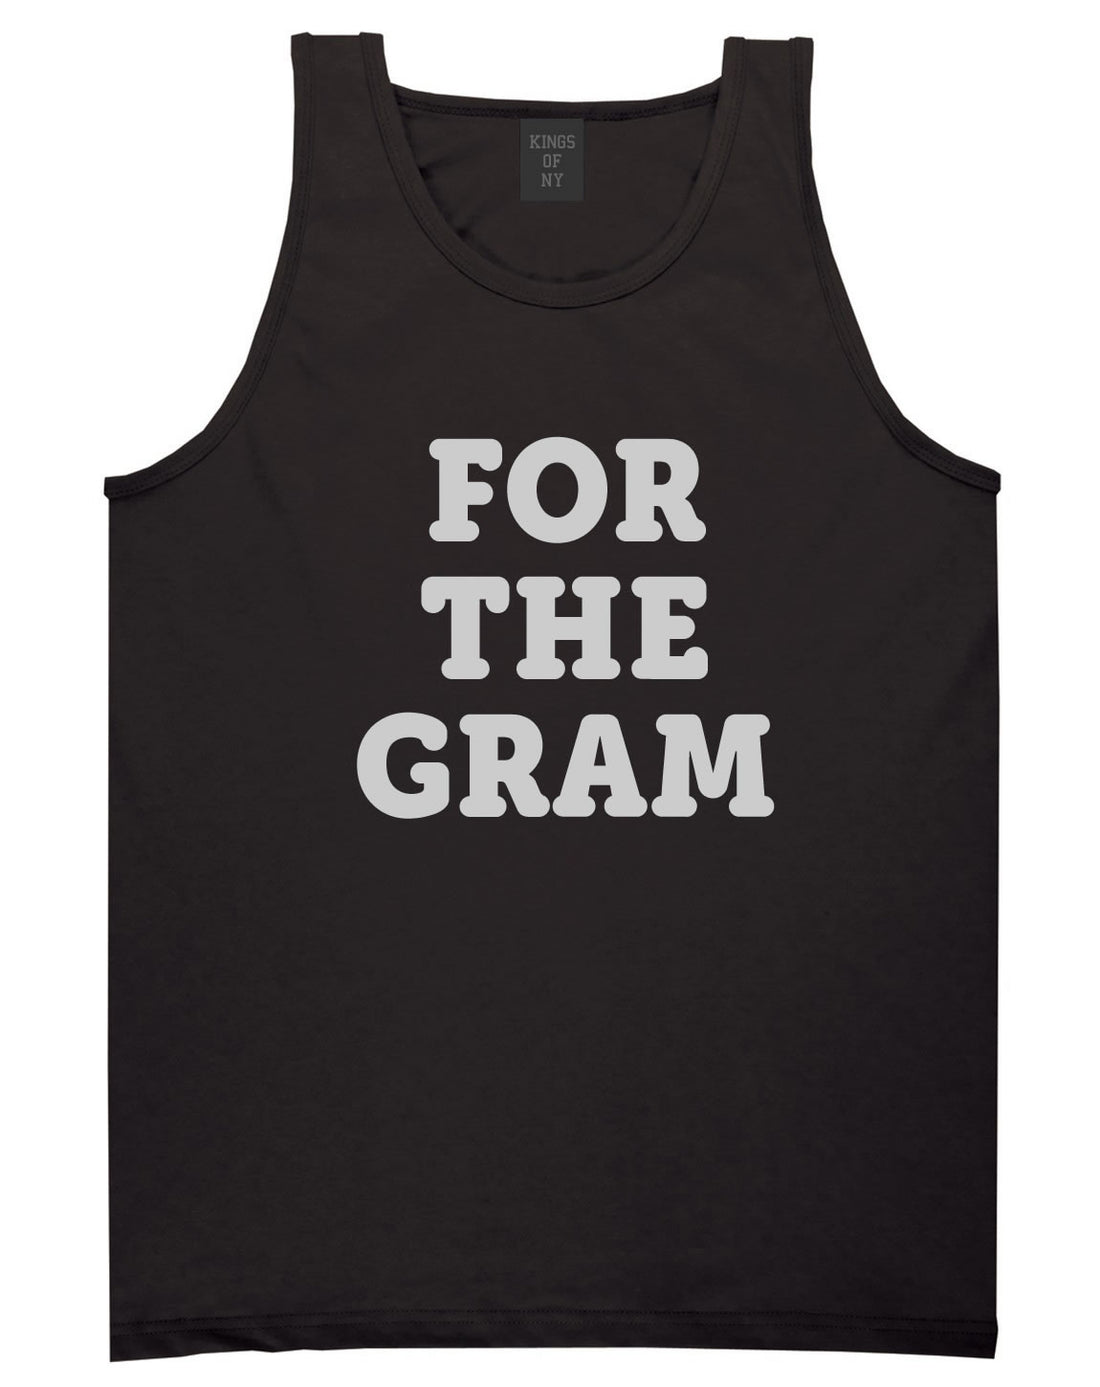 Do It For The Gram Tank Top by Kings Of NY